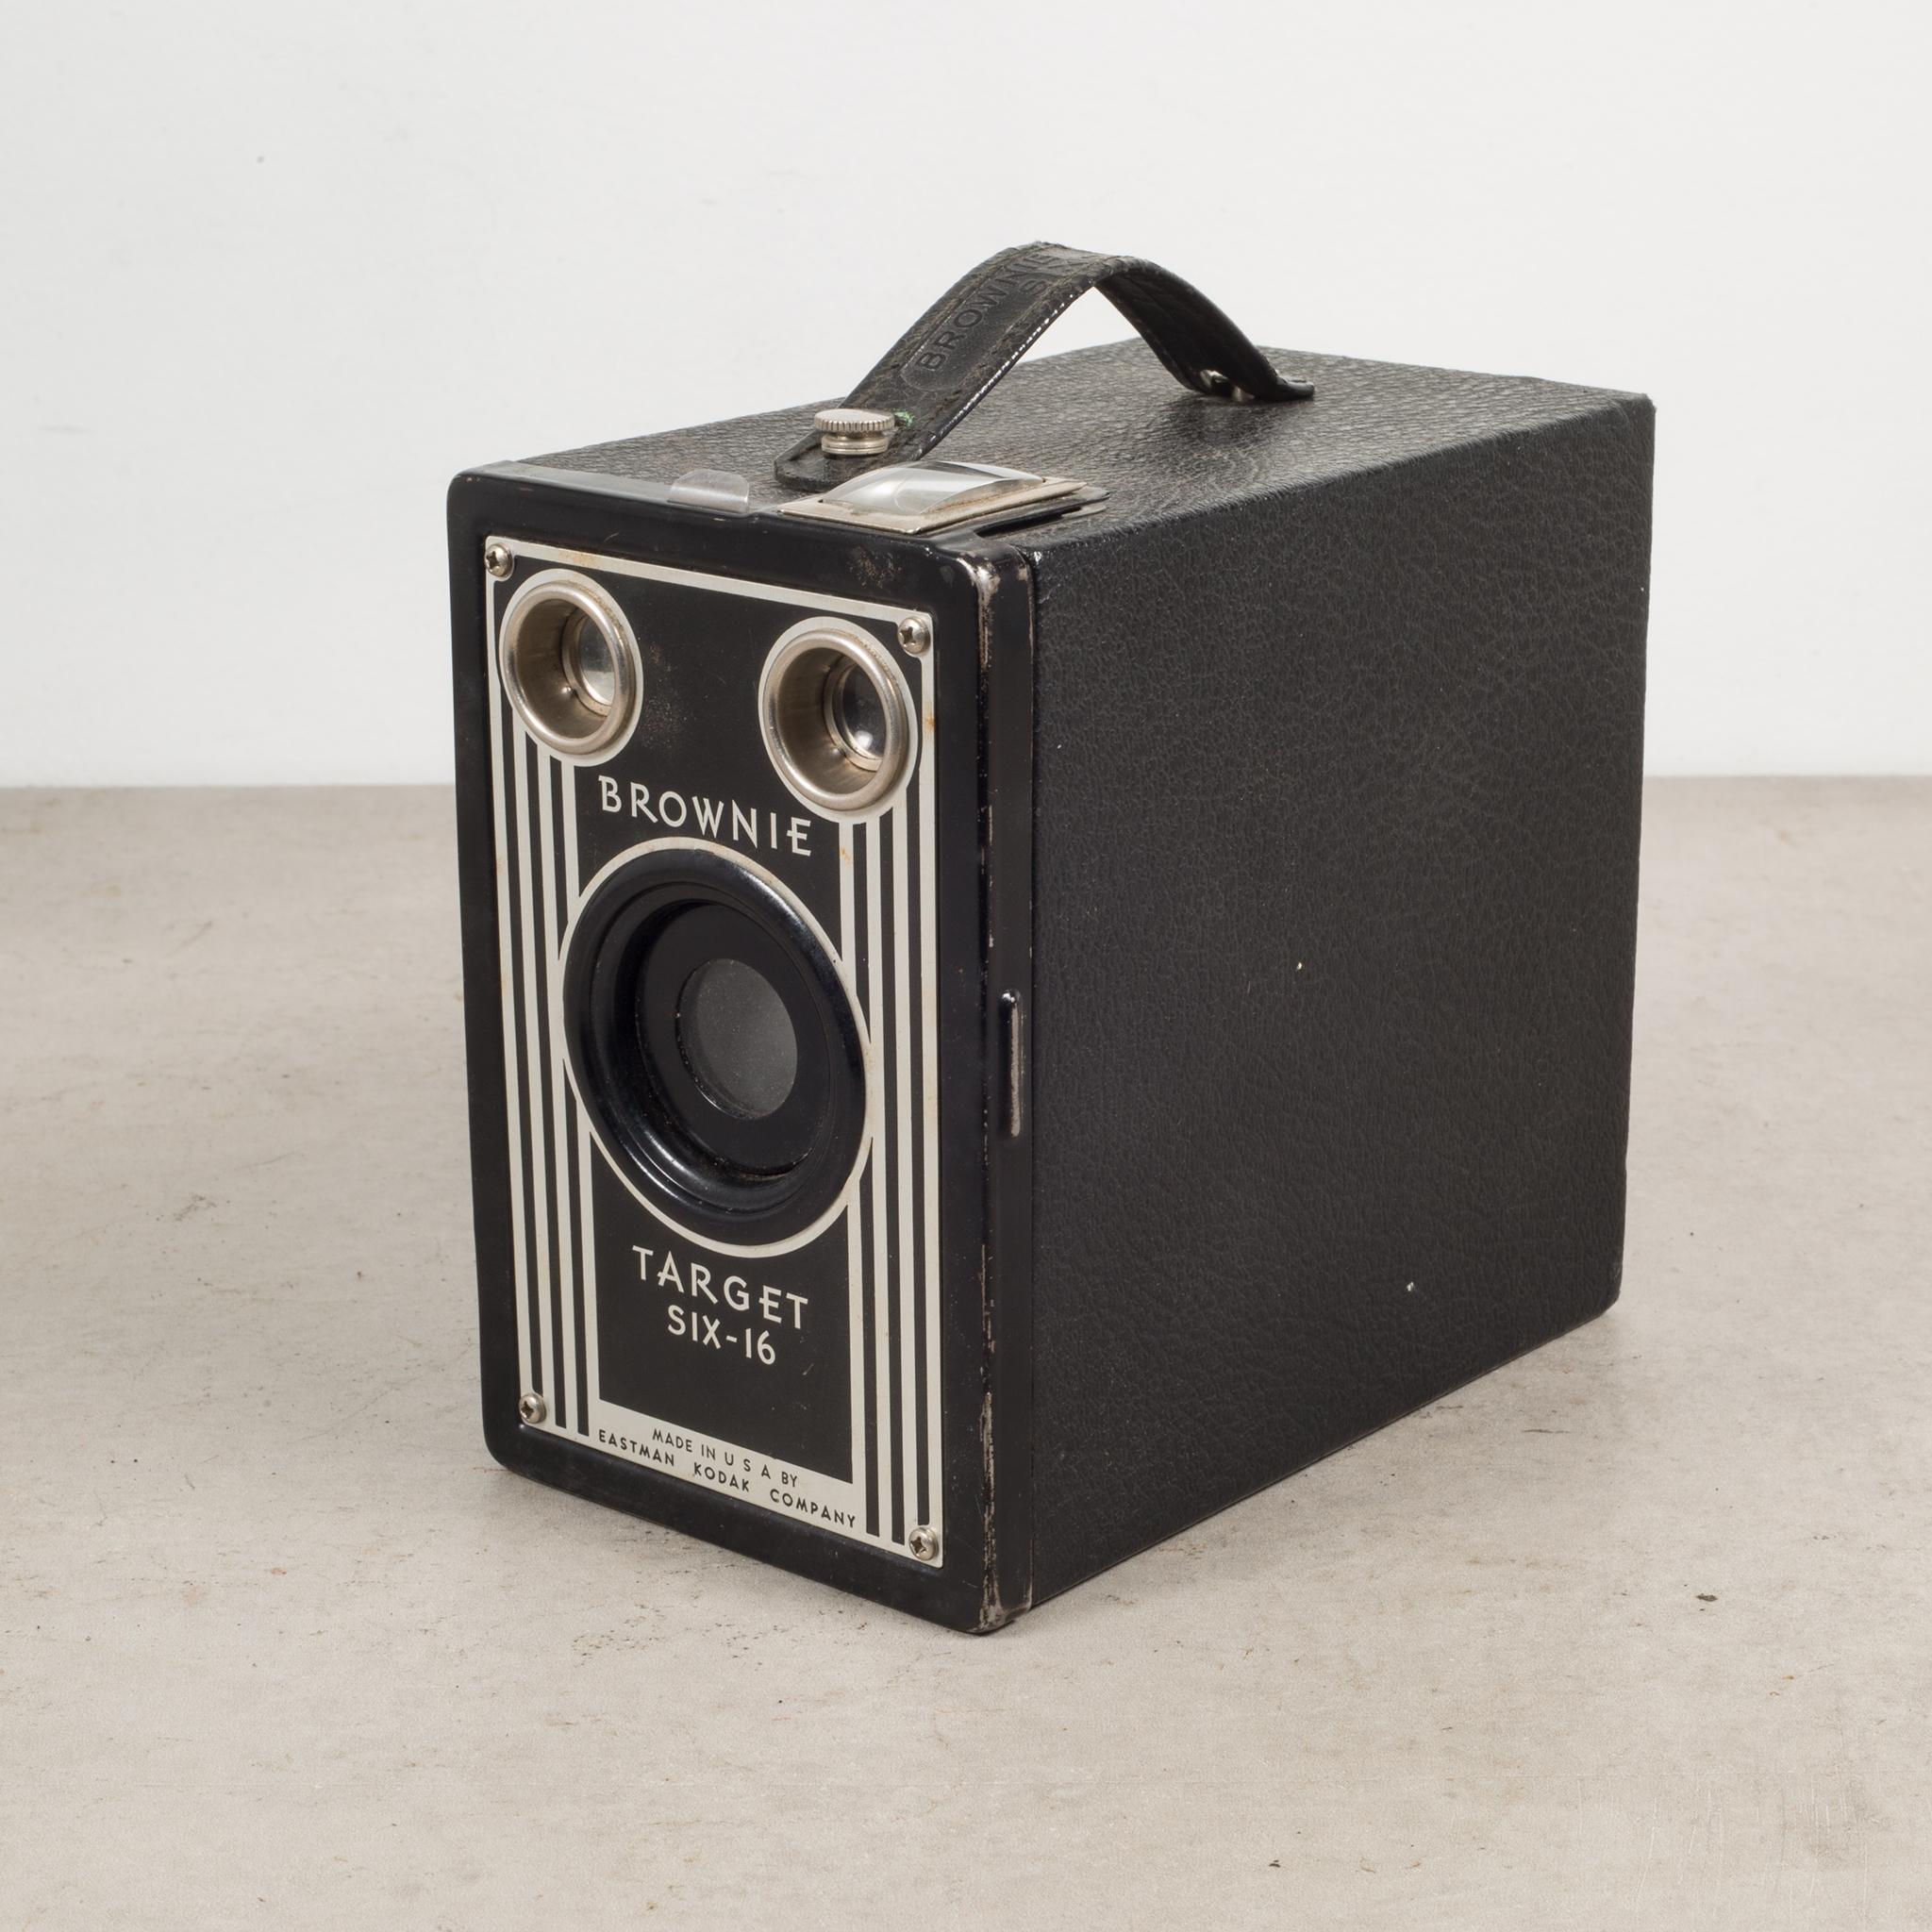 About:

This is an original leather Eastman Kodak brownie target six-6 box camera with original leather strap. This piece has retained its original finish with minimal structural damage. Camera may or may not work.

Creator: Eastman Kodak Camera